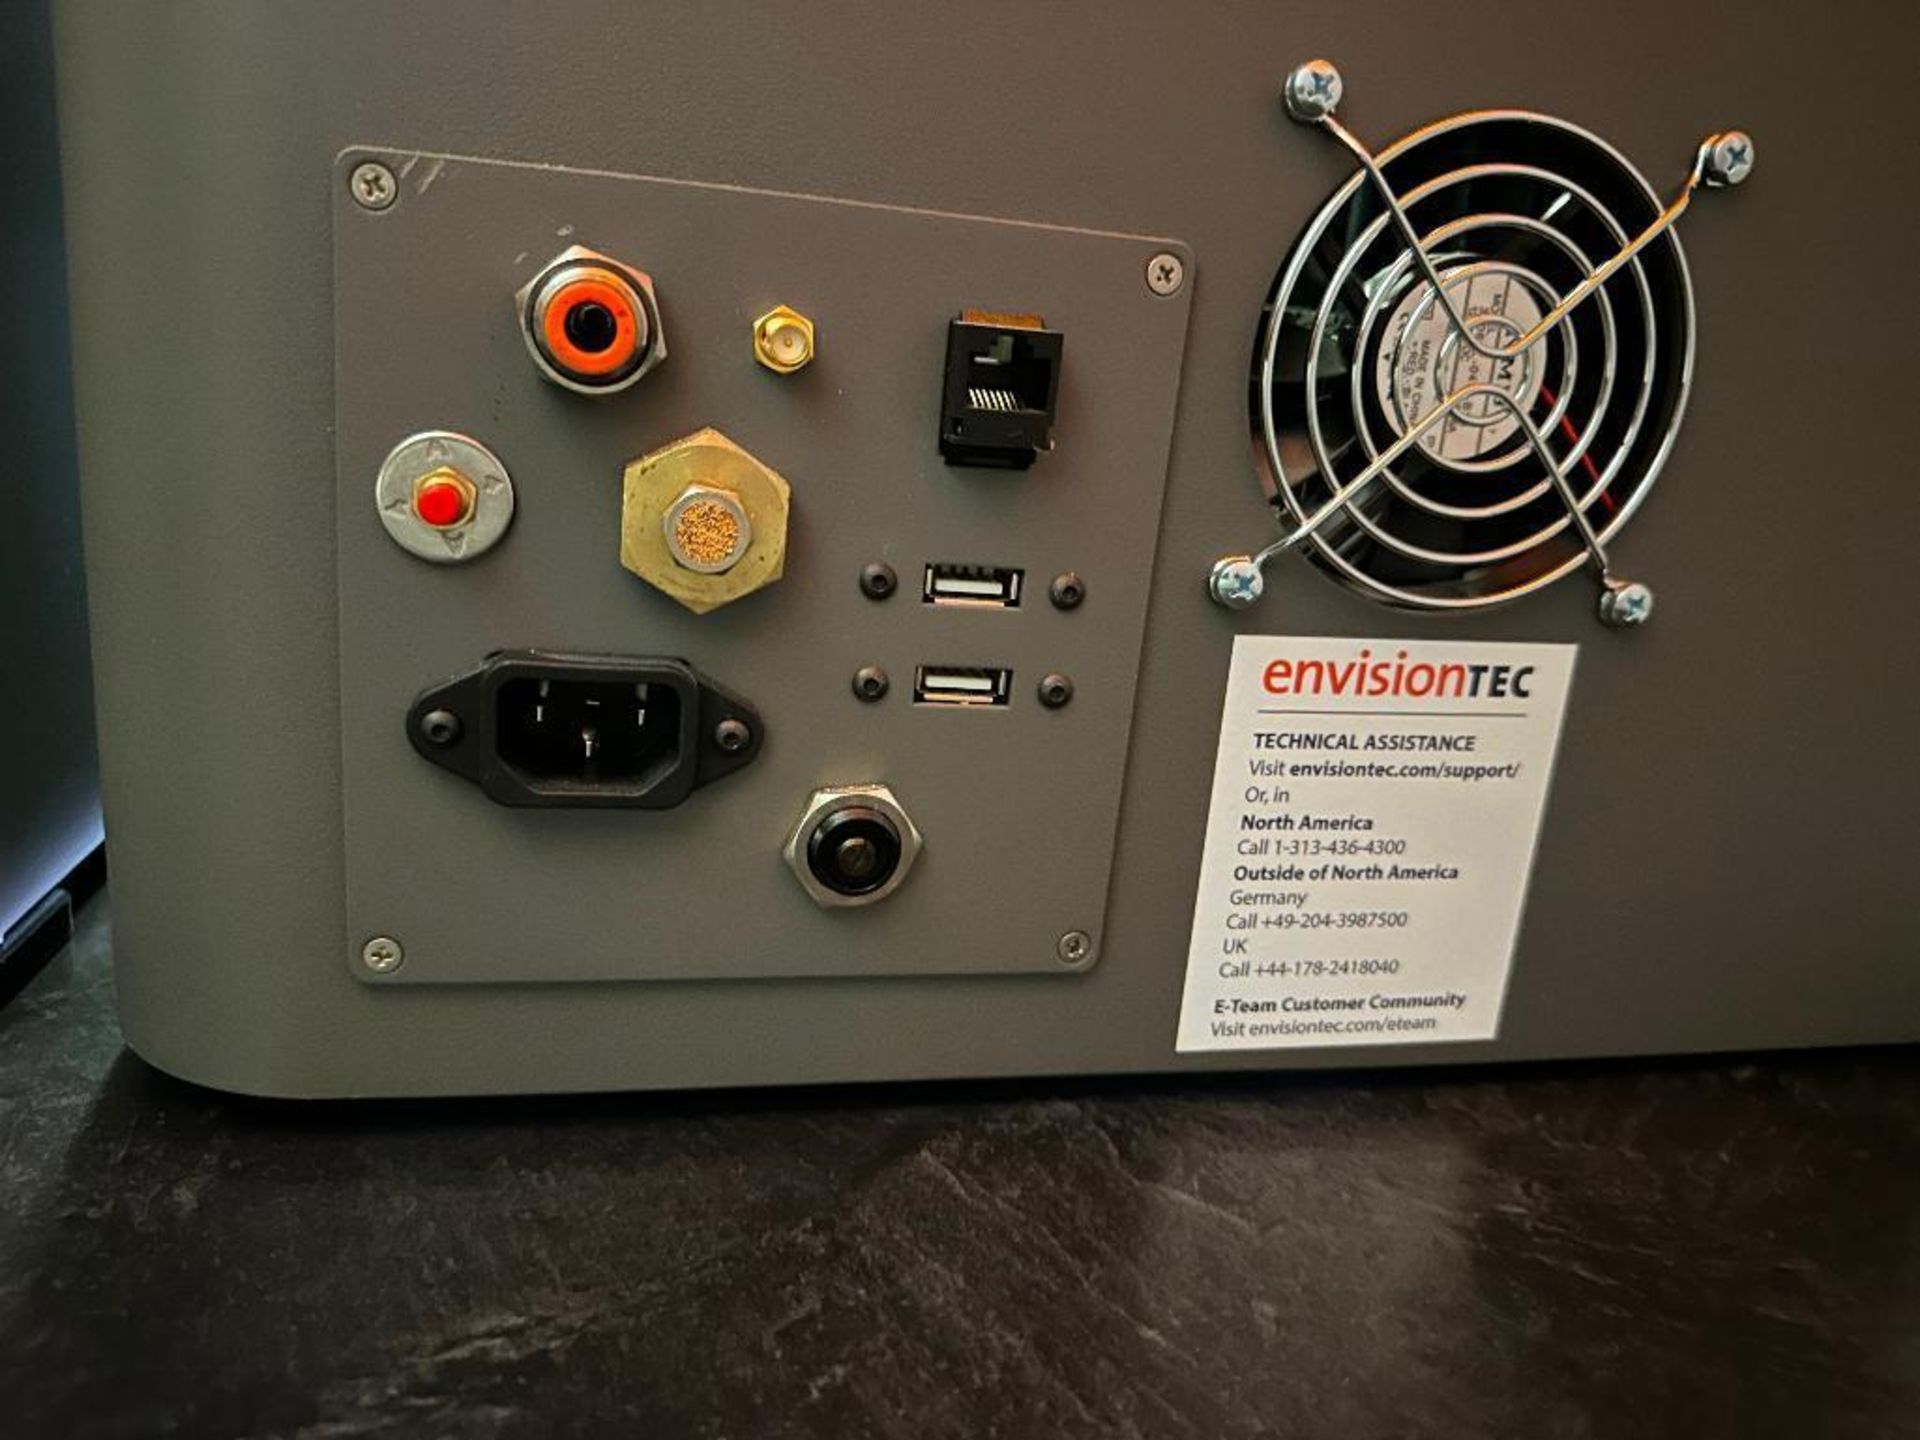 EnvisionOne cDLM Professional Resin 3D Printer w/ Parts Curing & Washing, Oxygen Concentrator, etc. - Image 7 of 19